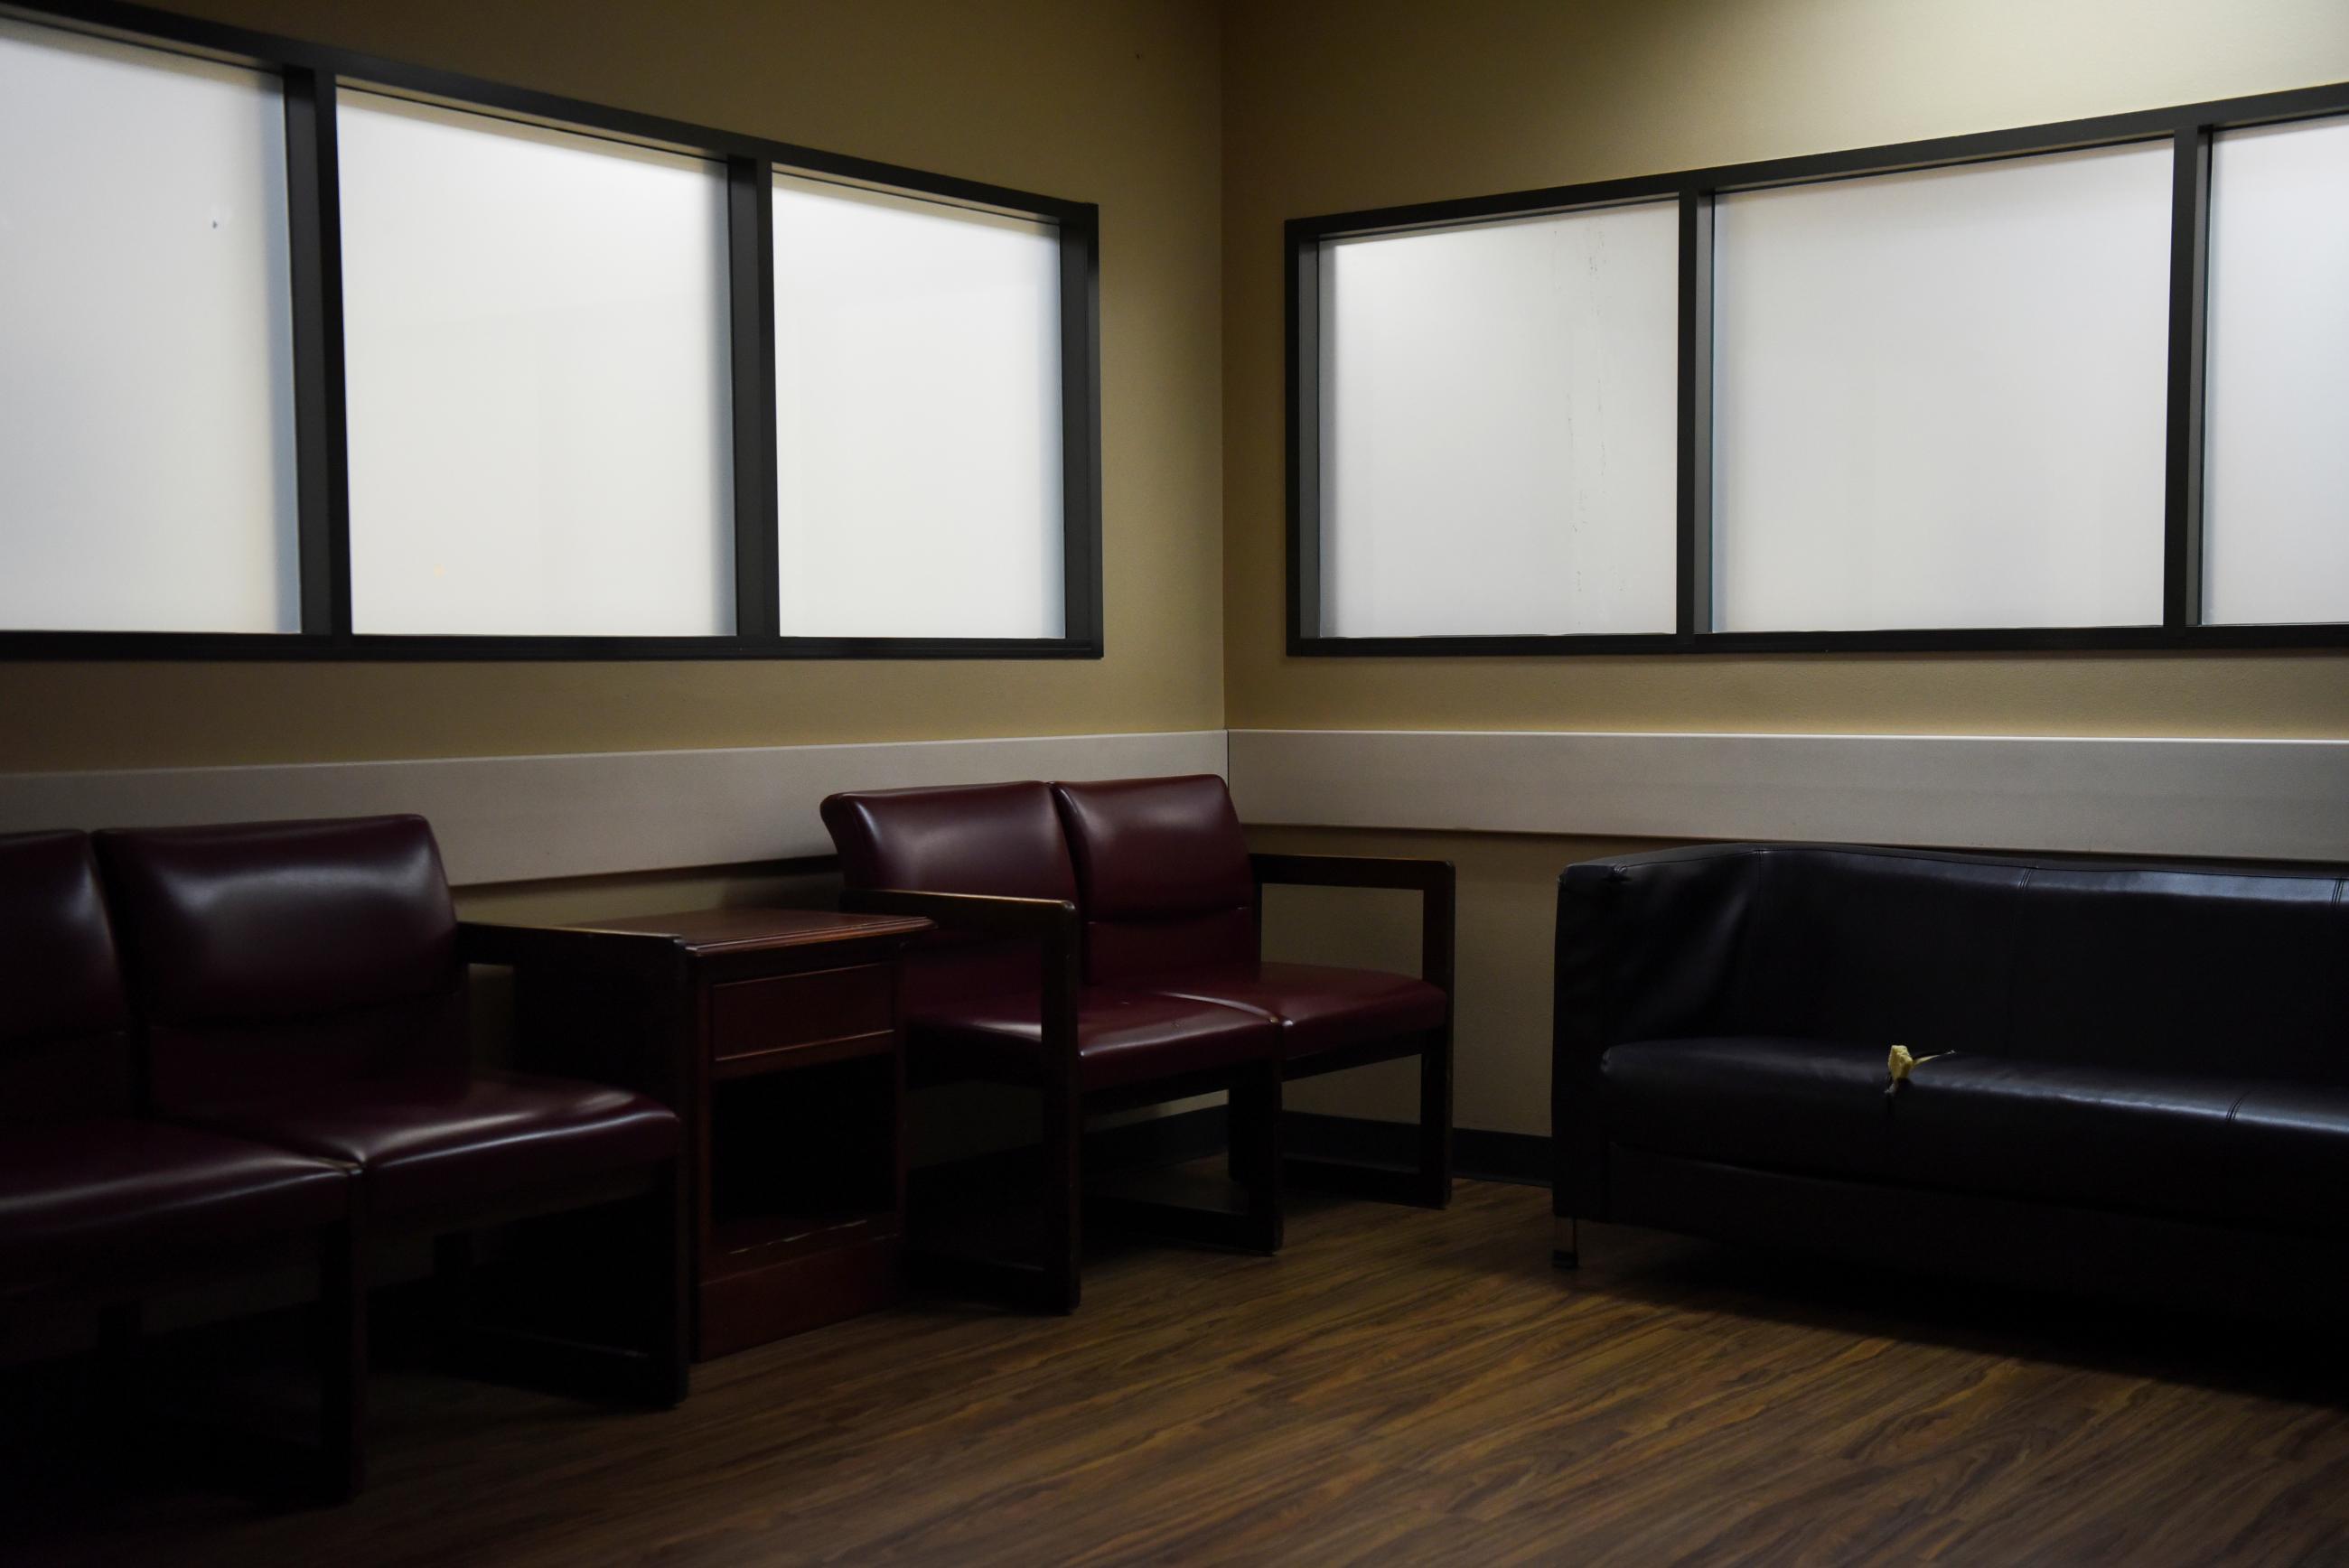 A waiting room sits empty at United Memorial Medical Center in Houston, Texas, United States, on September 30, 2020.